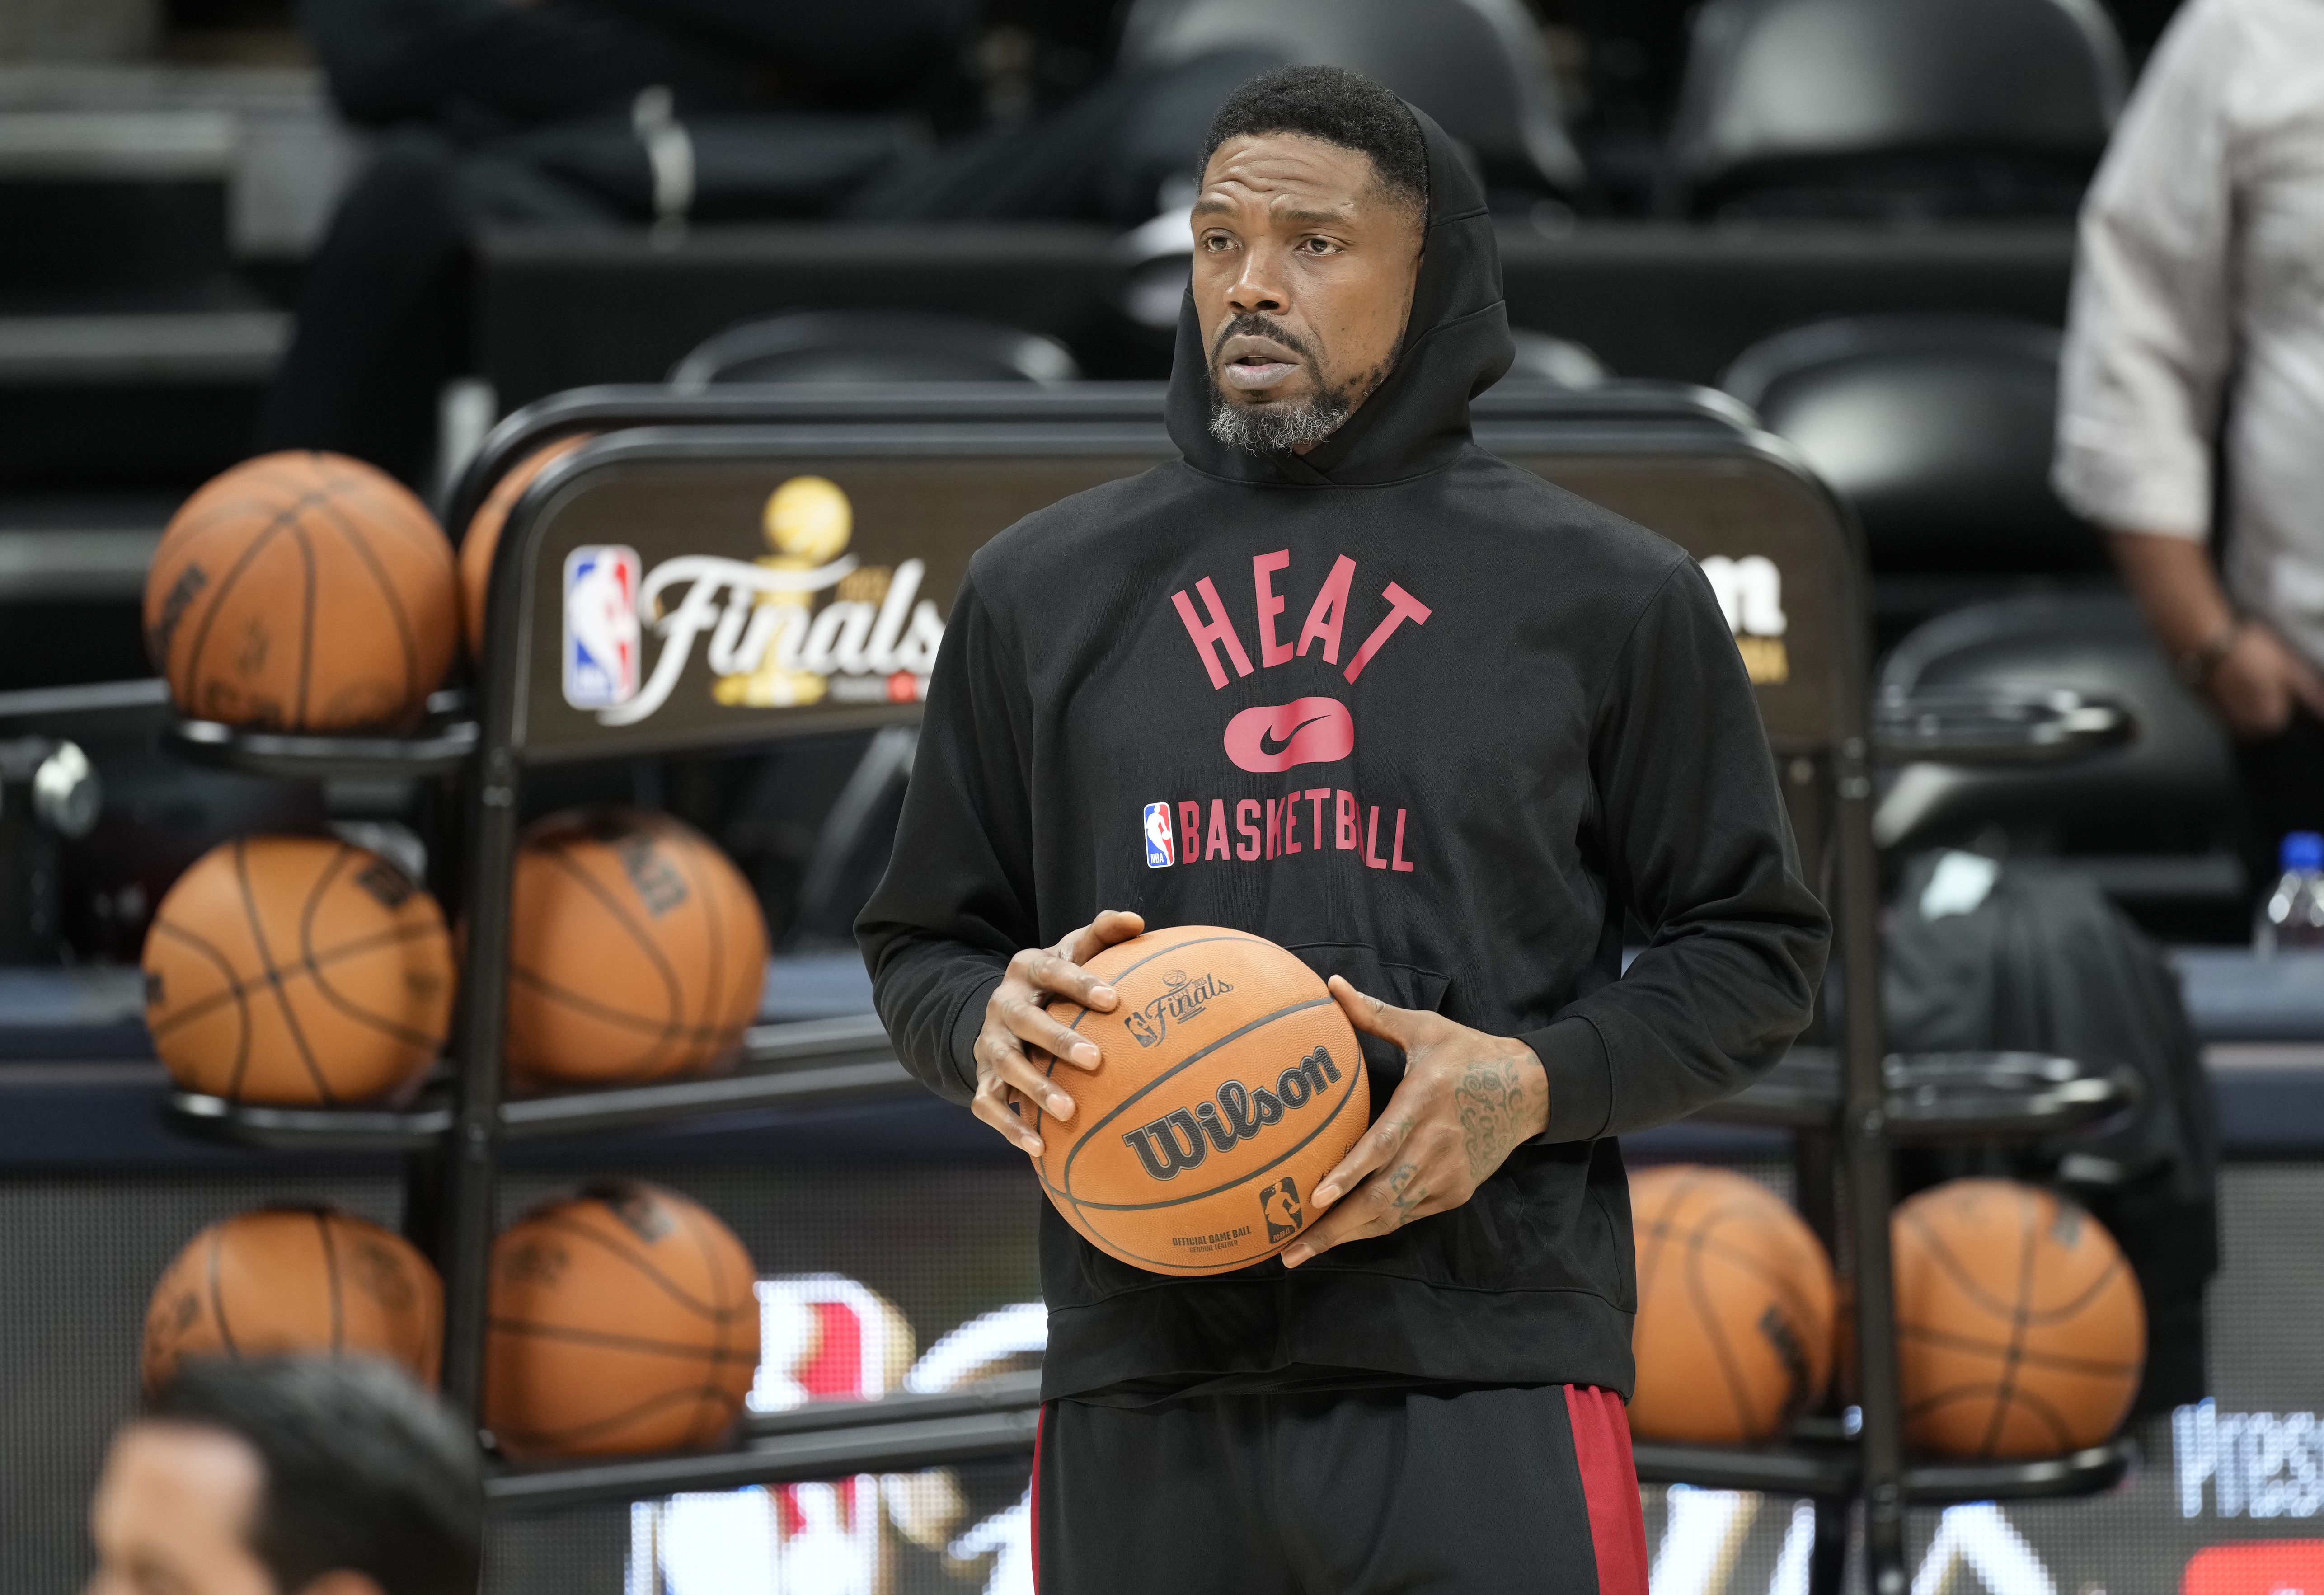 Udonis Haslem Re-Signs With Heat For 20th, Final Season